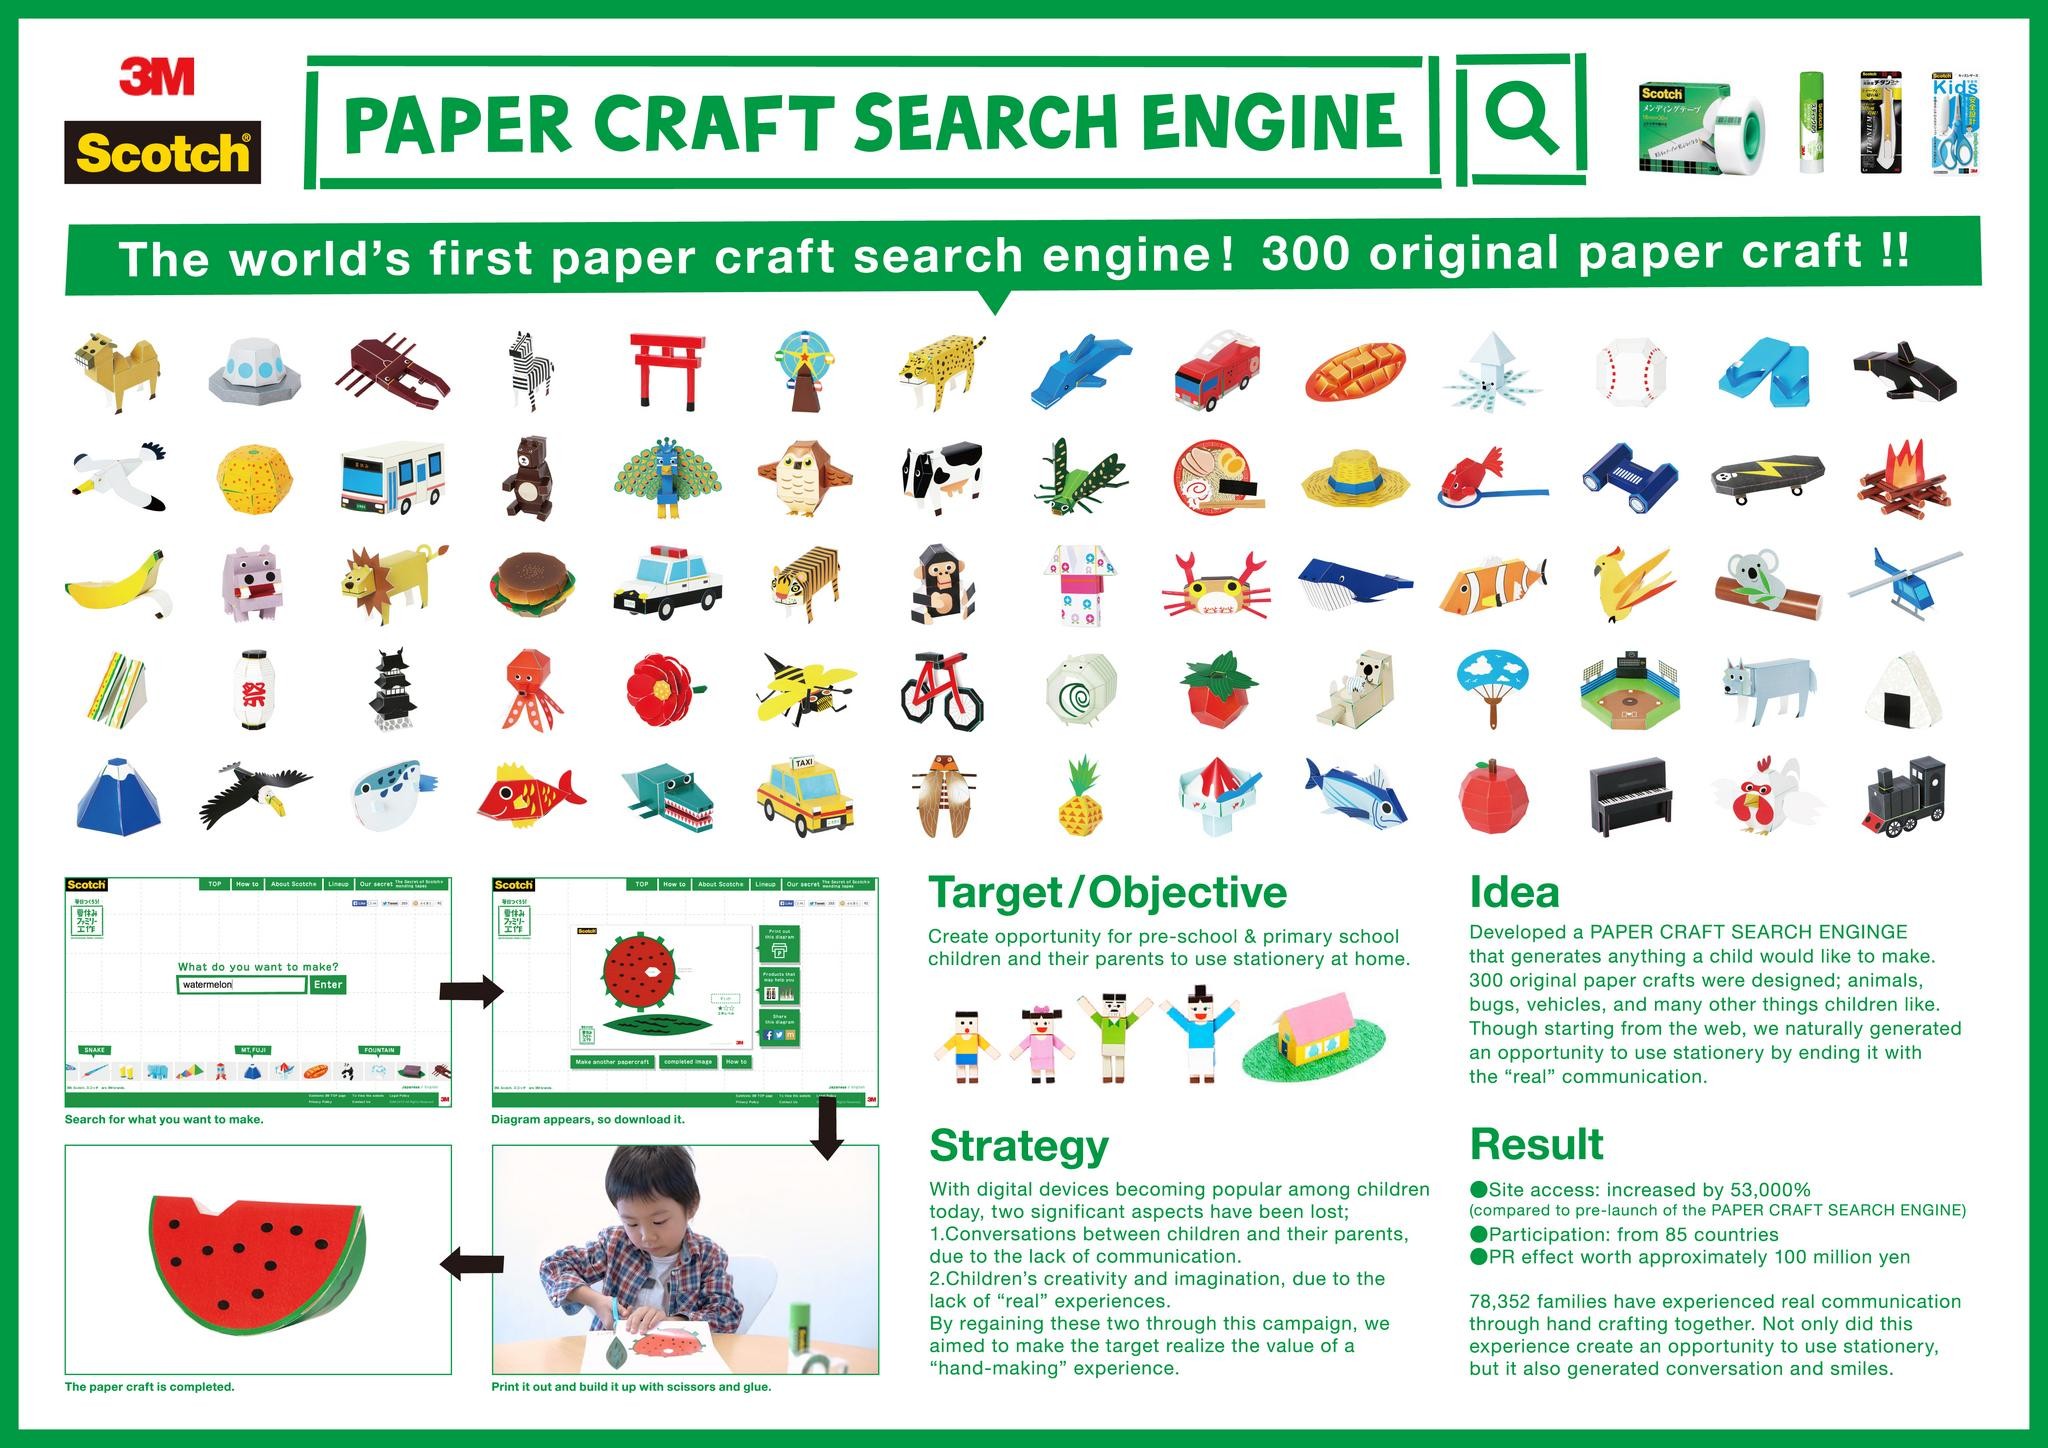 PAPER CRAFT SEARCH ENGINE